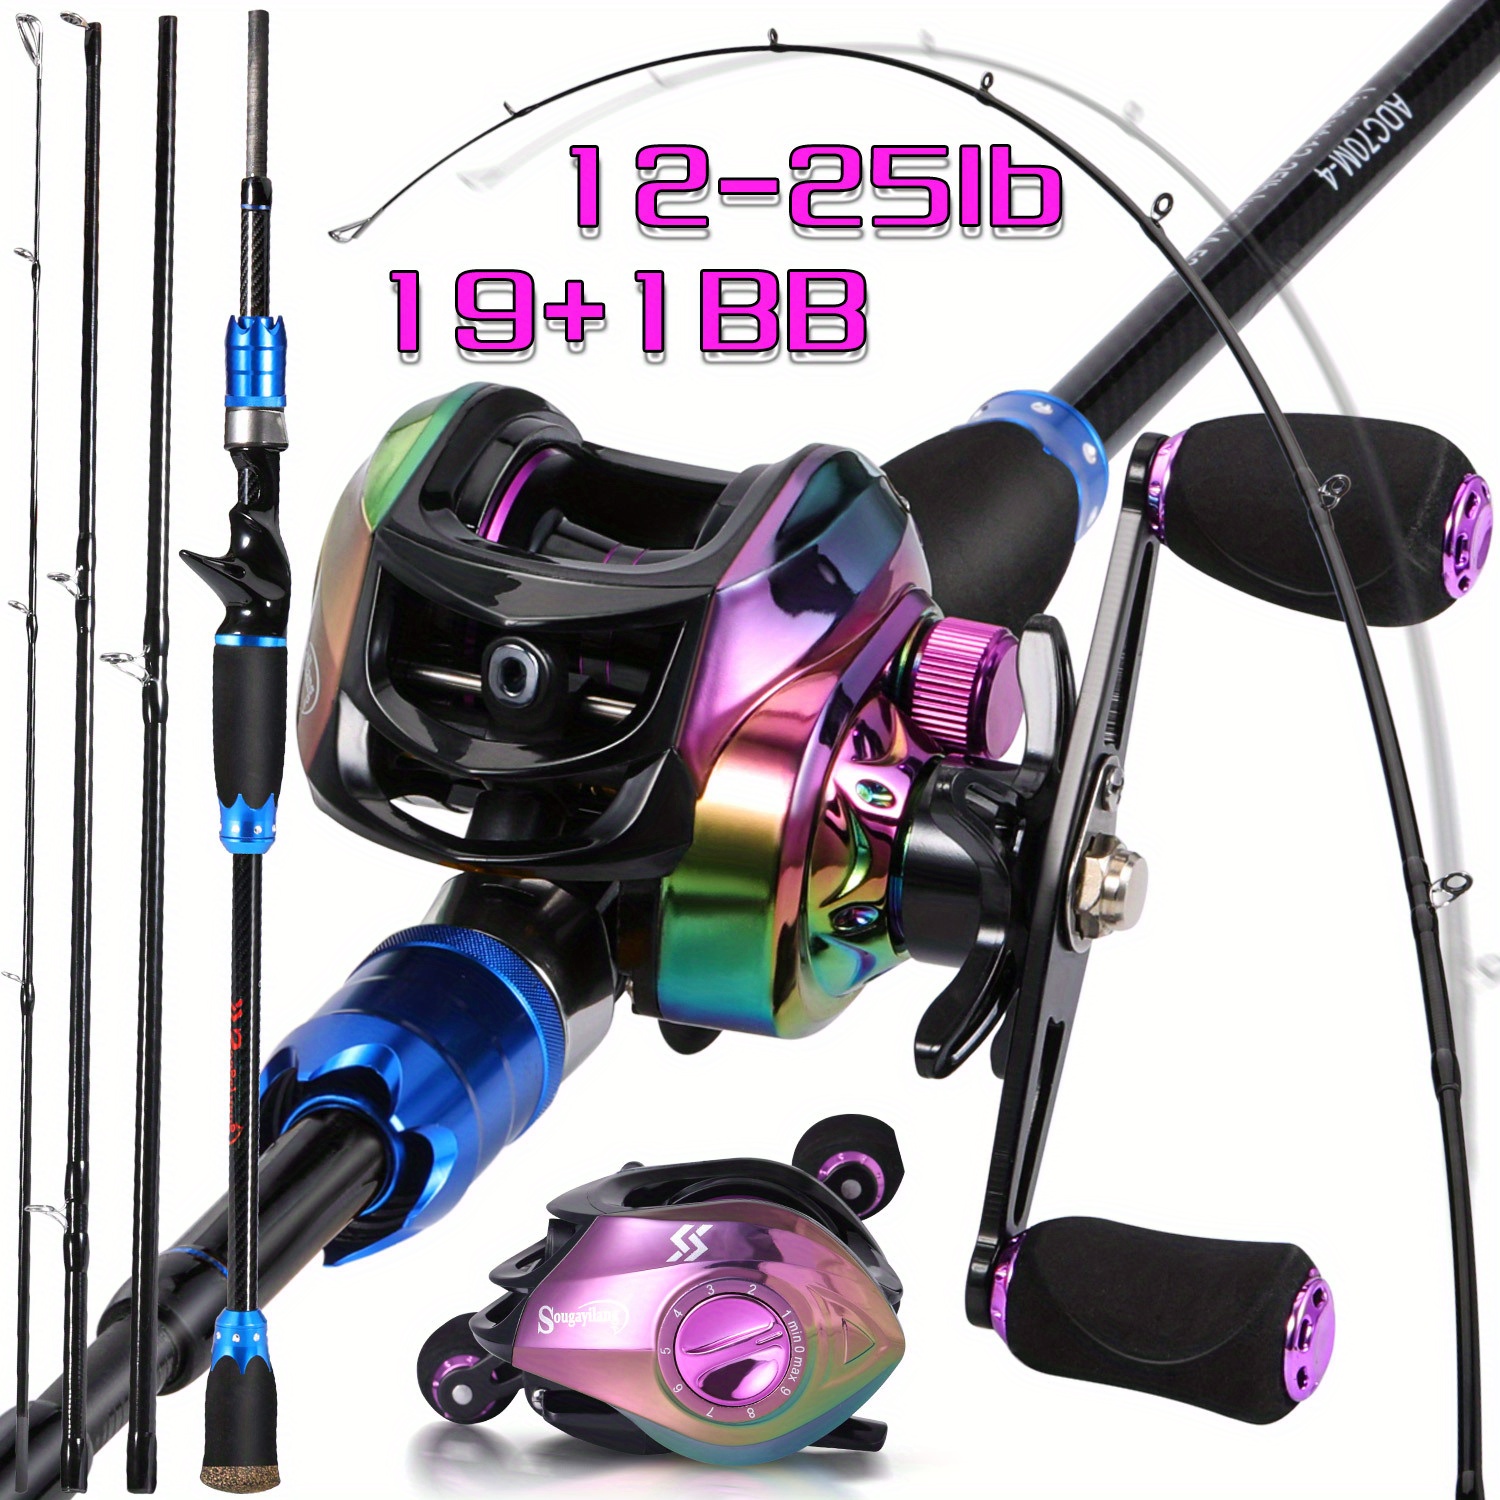  One Bass Spirit Flame Fishing Rod Reel Combo, Spinning &  Baitcasting Fishing Pole with Graphite 2Pc Blanks, Stainless Steel  Guides-6' Spinning Blue with 1000 Reel : Sports & Outdoors